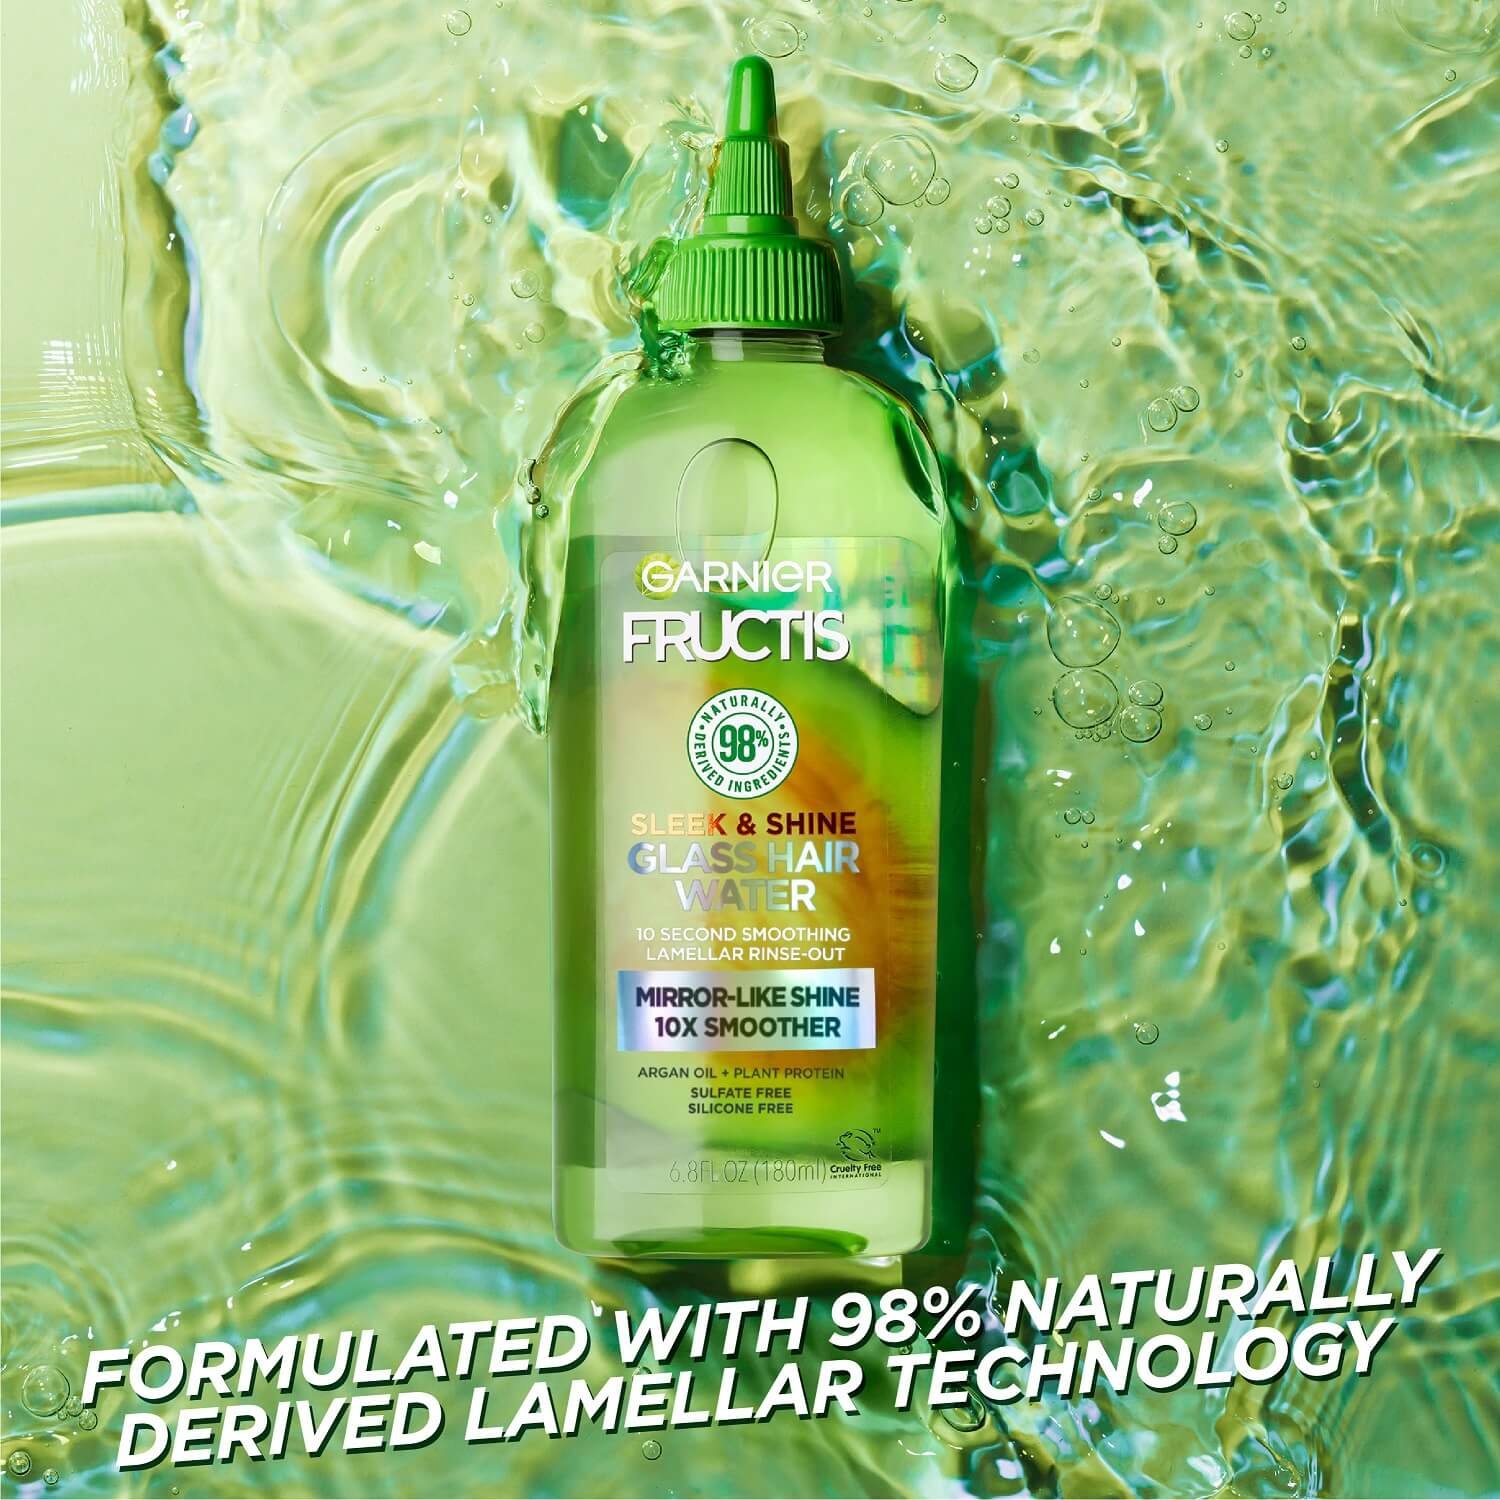 Formulated with 98% naturally derived lamellar technology